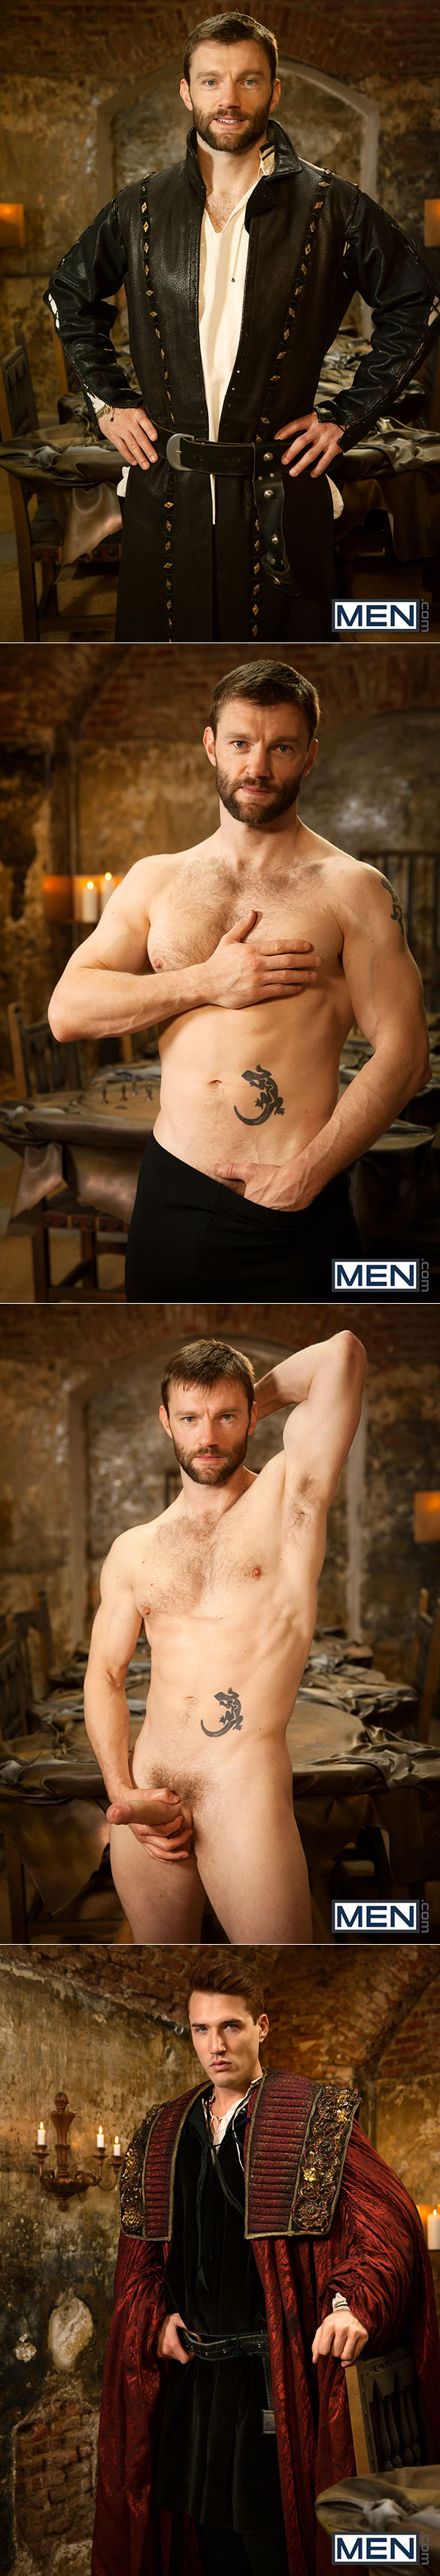 Men.com: Dennis West fucks Theo Ford in “Gay of Thrones, Part 8”